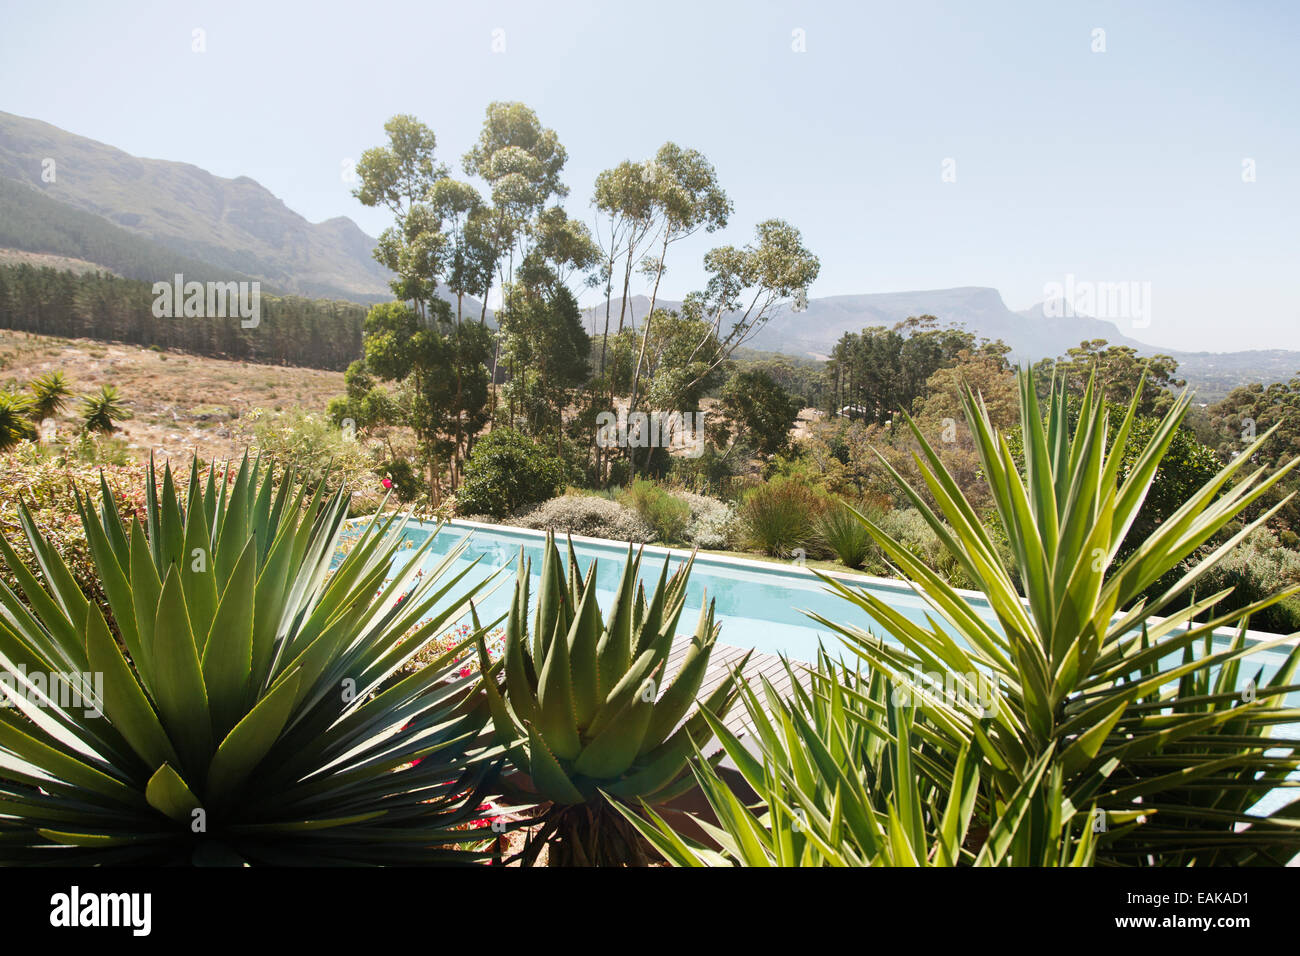 Swimming pool with aloe plants in foreground in hilly landscape Stock Photo